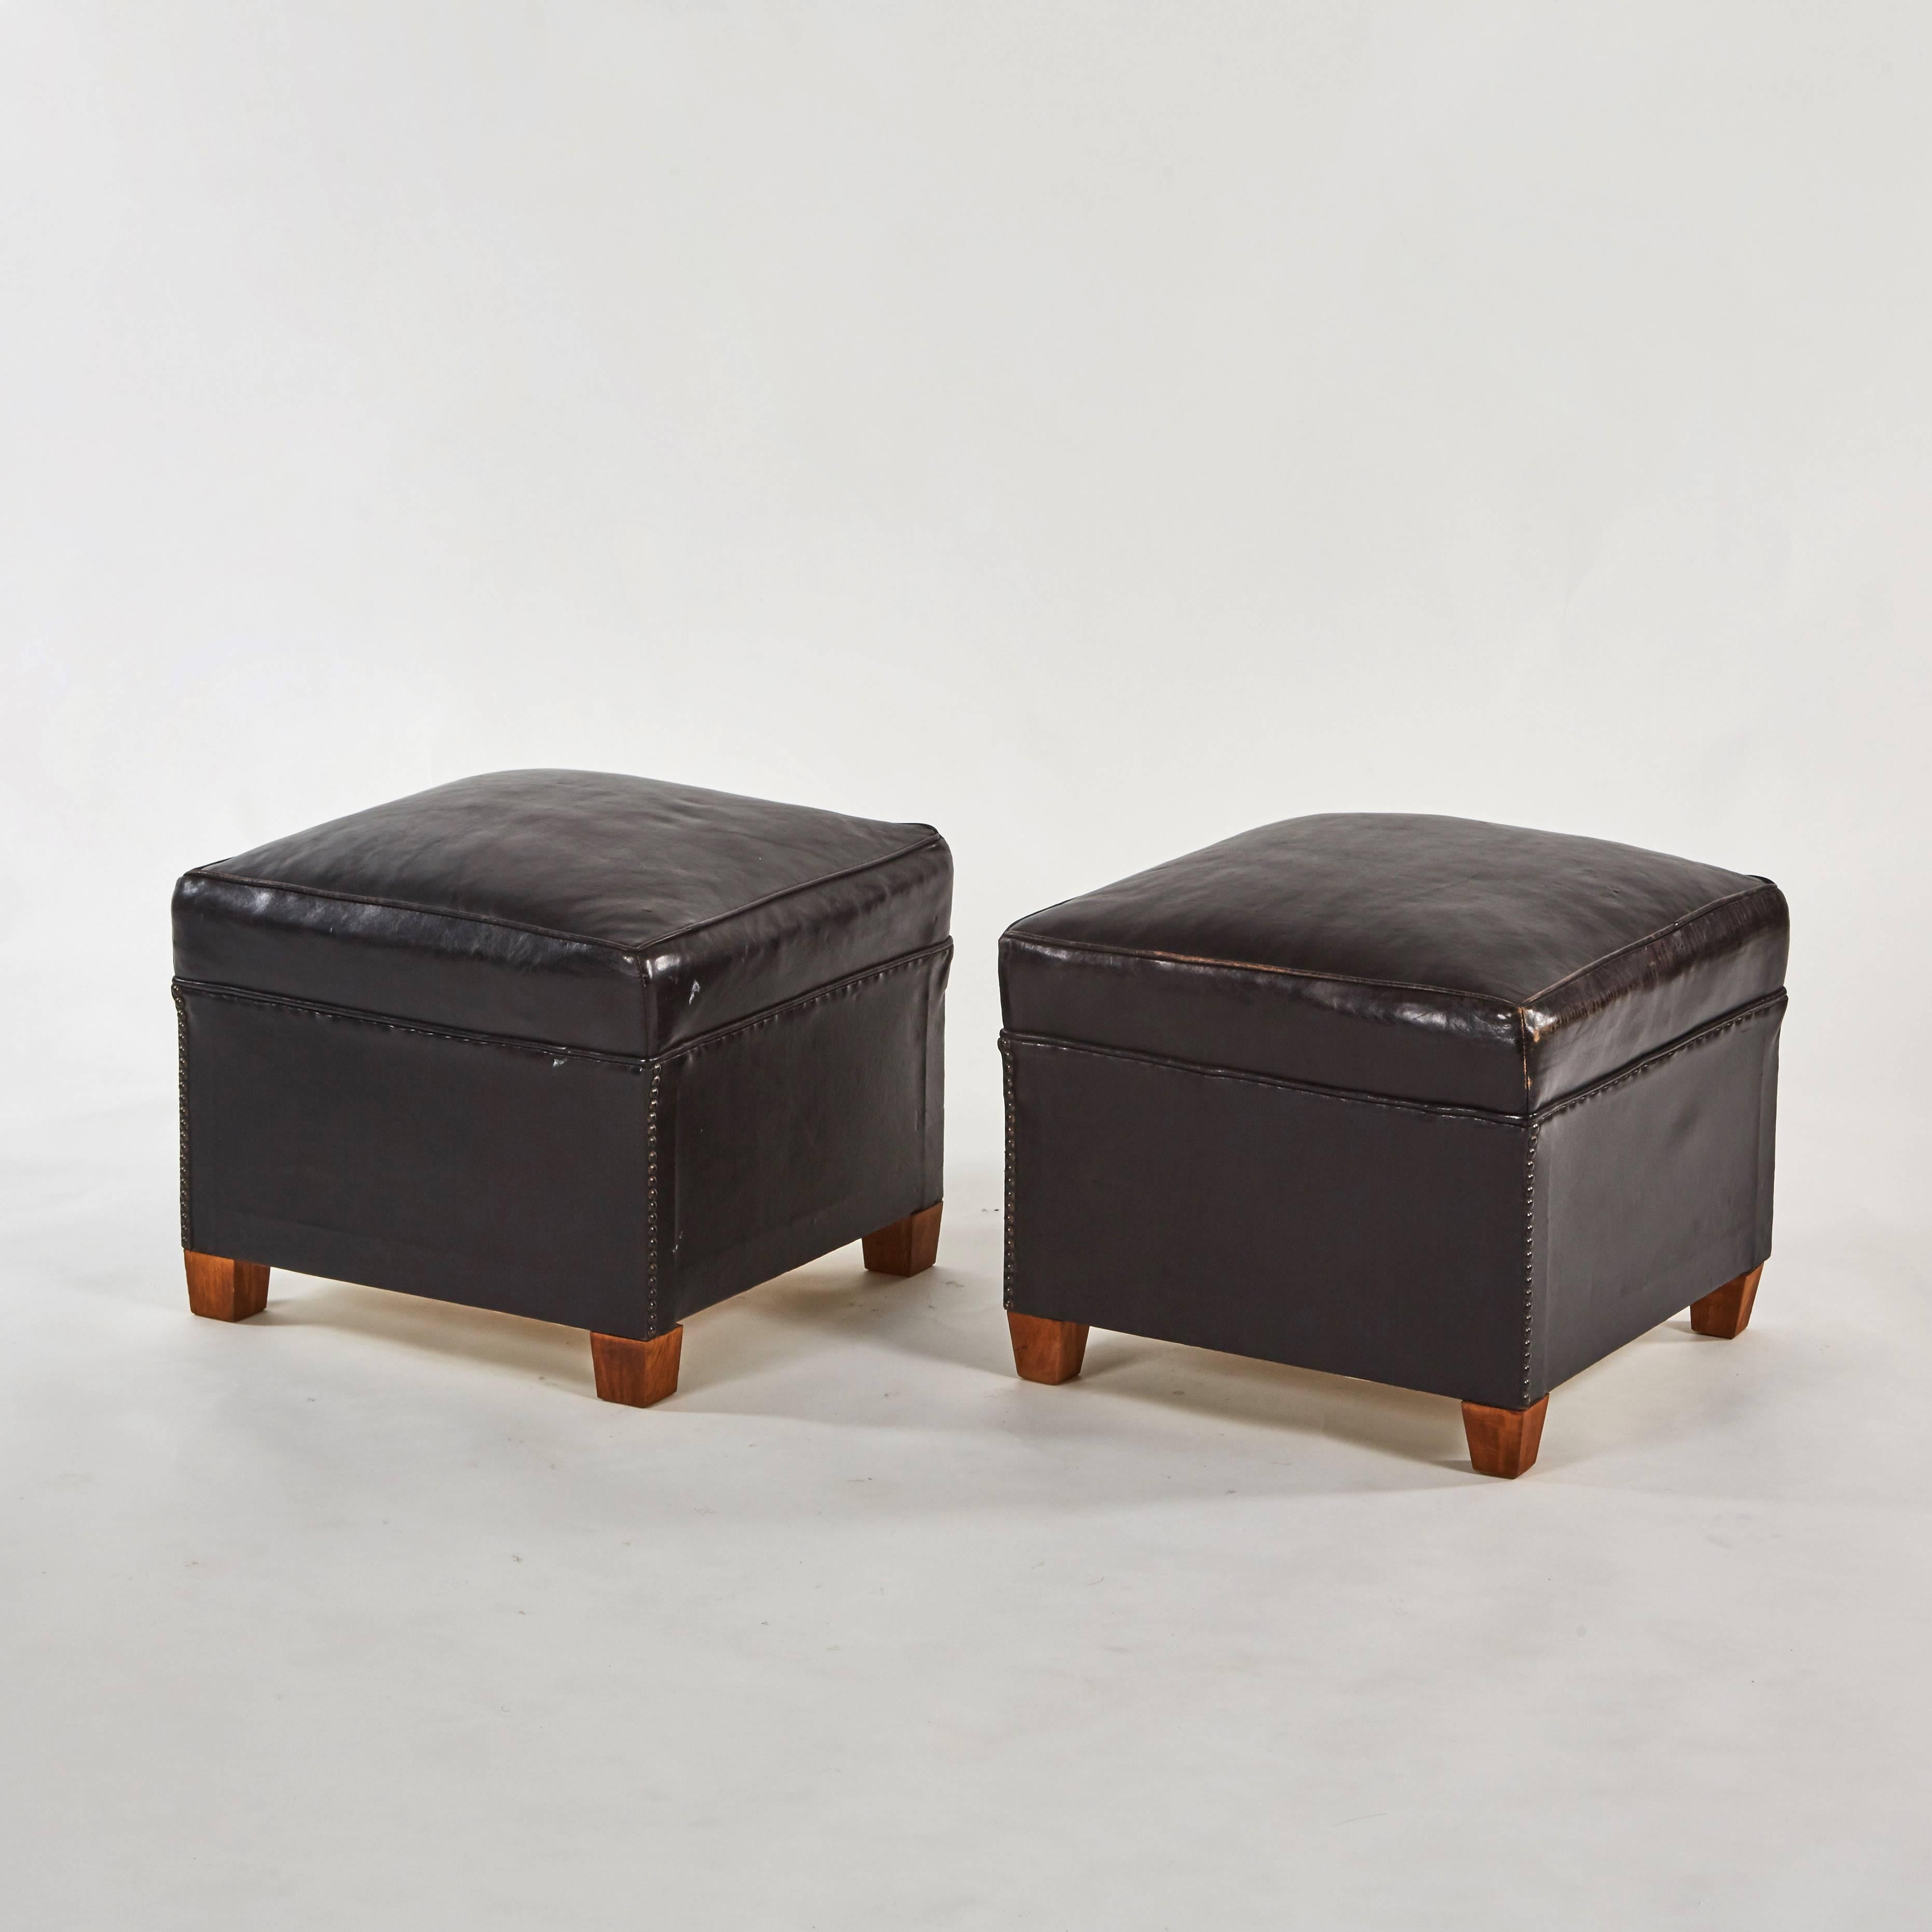 A set of four leather footstools in Art Deco style. (Can be sold individually for $1975).